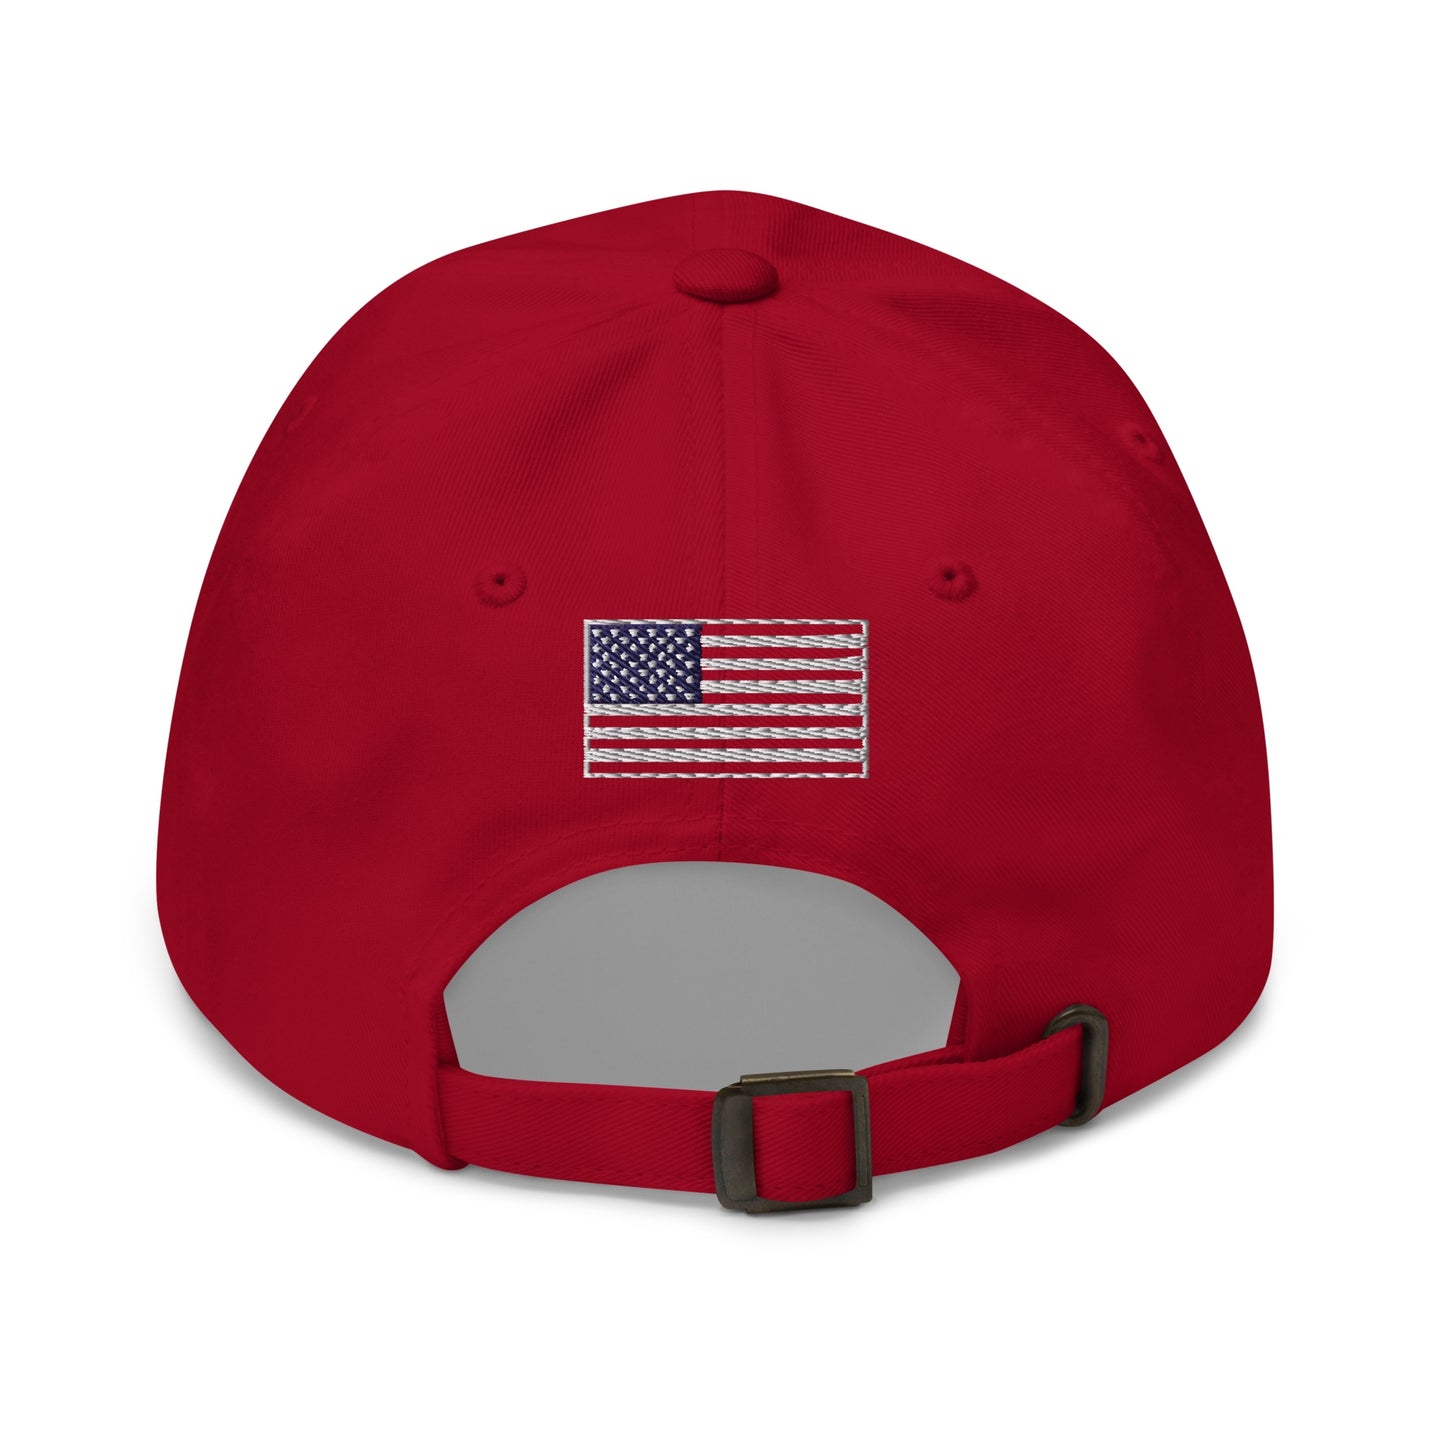 FOX One Nation Embroidered Dad Hat